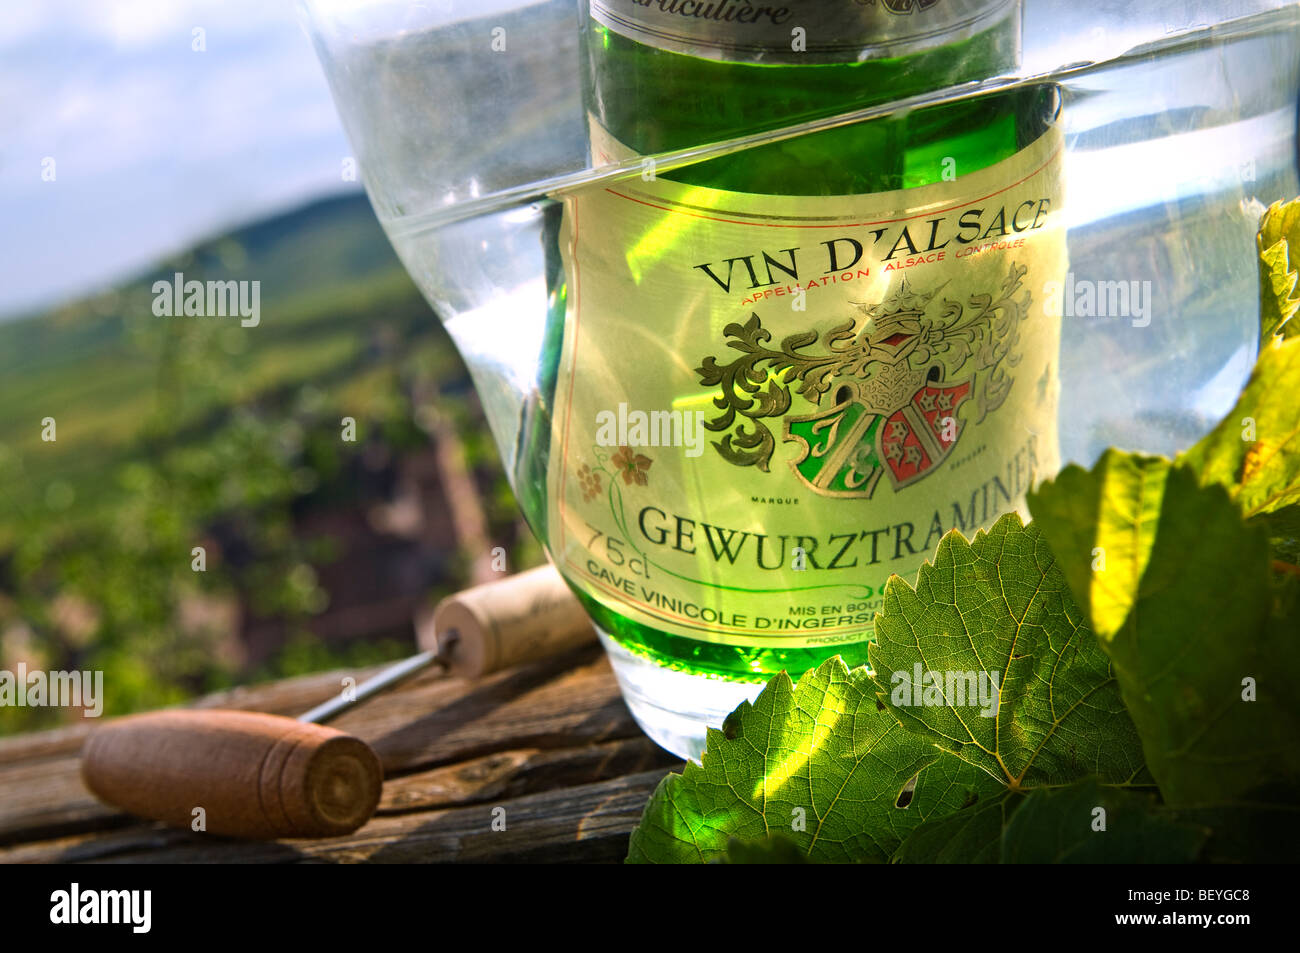 Gewurztraminer wine bottle in cooler with cork and corkscrew  Riquewihr wine village and vineyards in background Alsace France Stock Photo